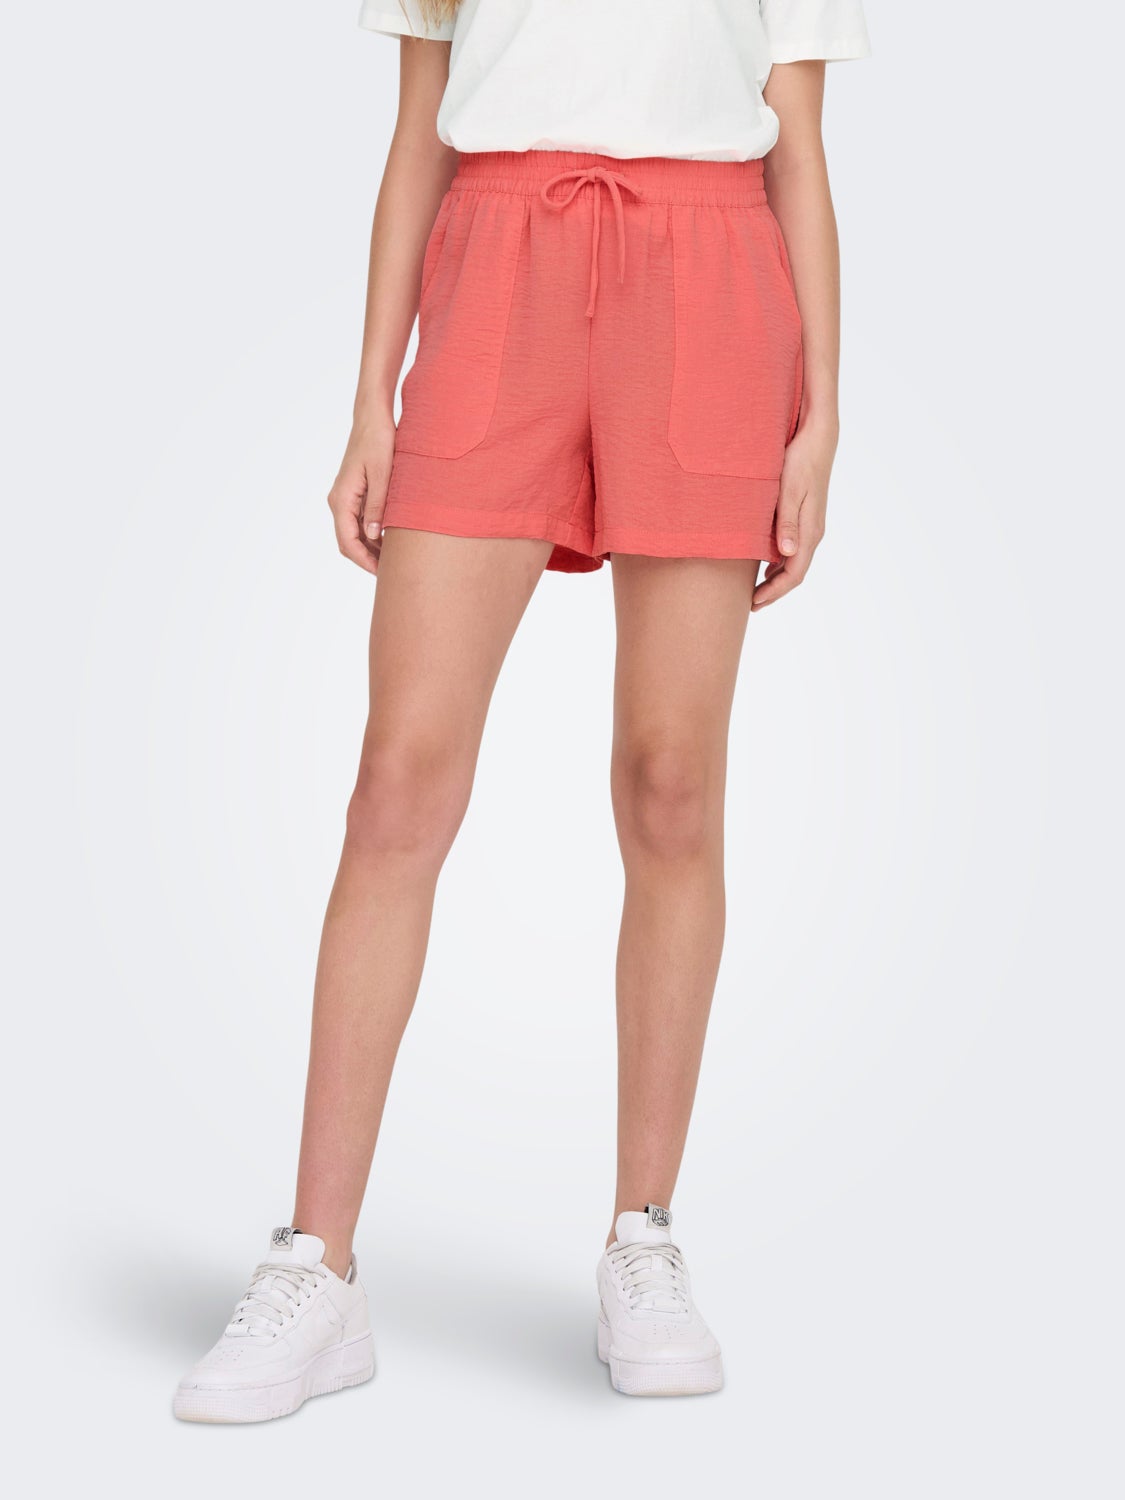 Women's shorts with correction effect Peachy Pink 12716 - buy at